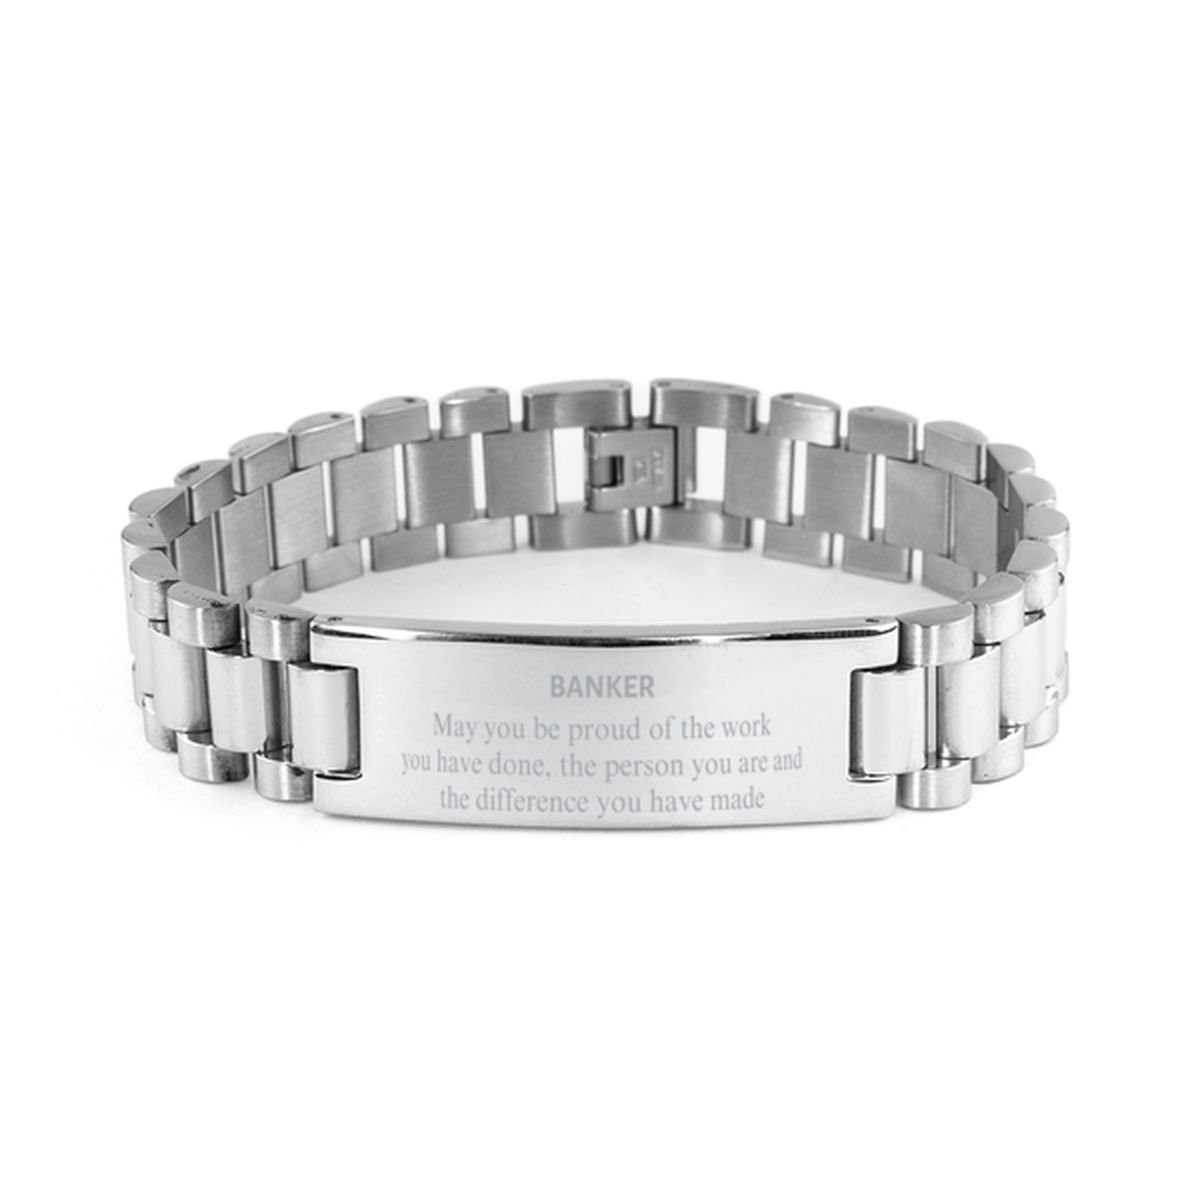 Banker May you be proud of the work you have done, Retirement Banker Ladder Stainless Steel Bracelet for Colleague Appreciation Gifts Amazing for Banker